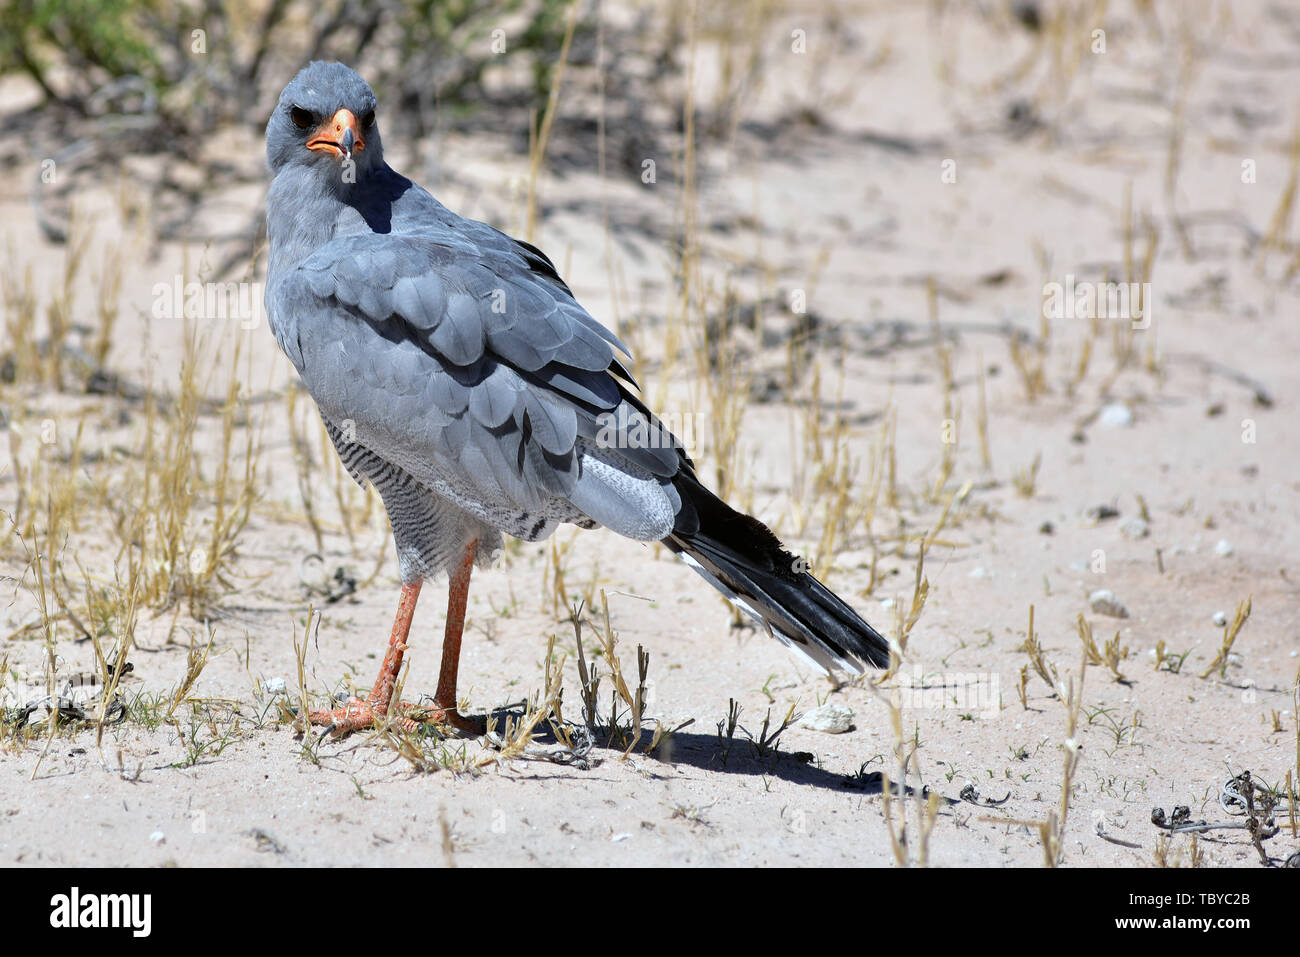 Namutoni, Namibia. 24th Feb, 2019. A Gabarhabicht (Melierax gabar) walks around Etosha National Park on the ground, taken on 24.02.2019. The Gabarhabicht is a monotypic species of the Singhabichte without known subspecies. It is distributed throughout southern Africa, reaching a total length of up to 35 centimeters and a weight of up to 150 grams. This species of bird leads a lifelong monogamous. Credit: Matthias Toedt/dpa-Zentralbild/ZB/Picture Alliance | usage worldwide/dpa/Alamy Live News Stock Photo